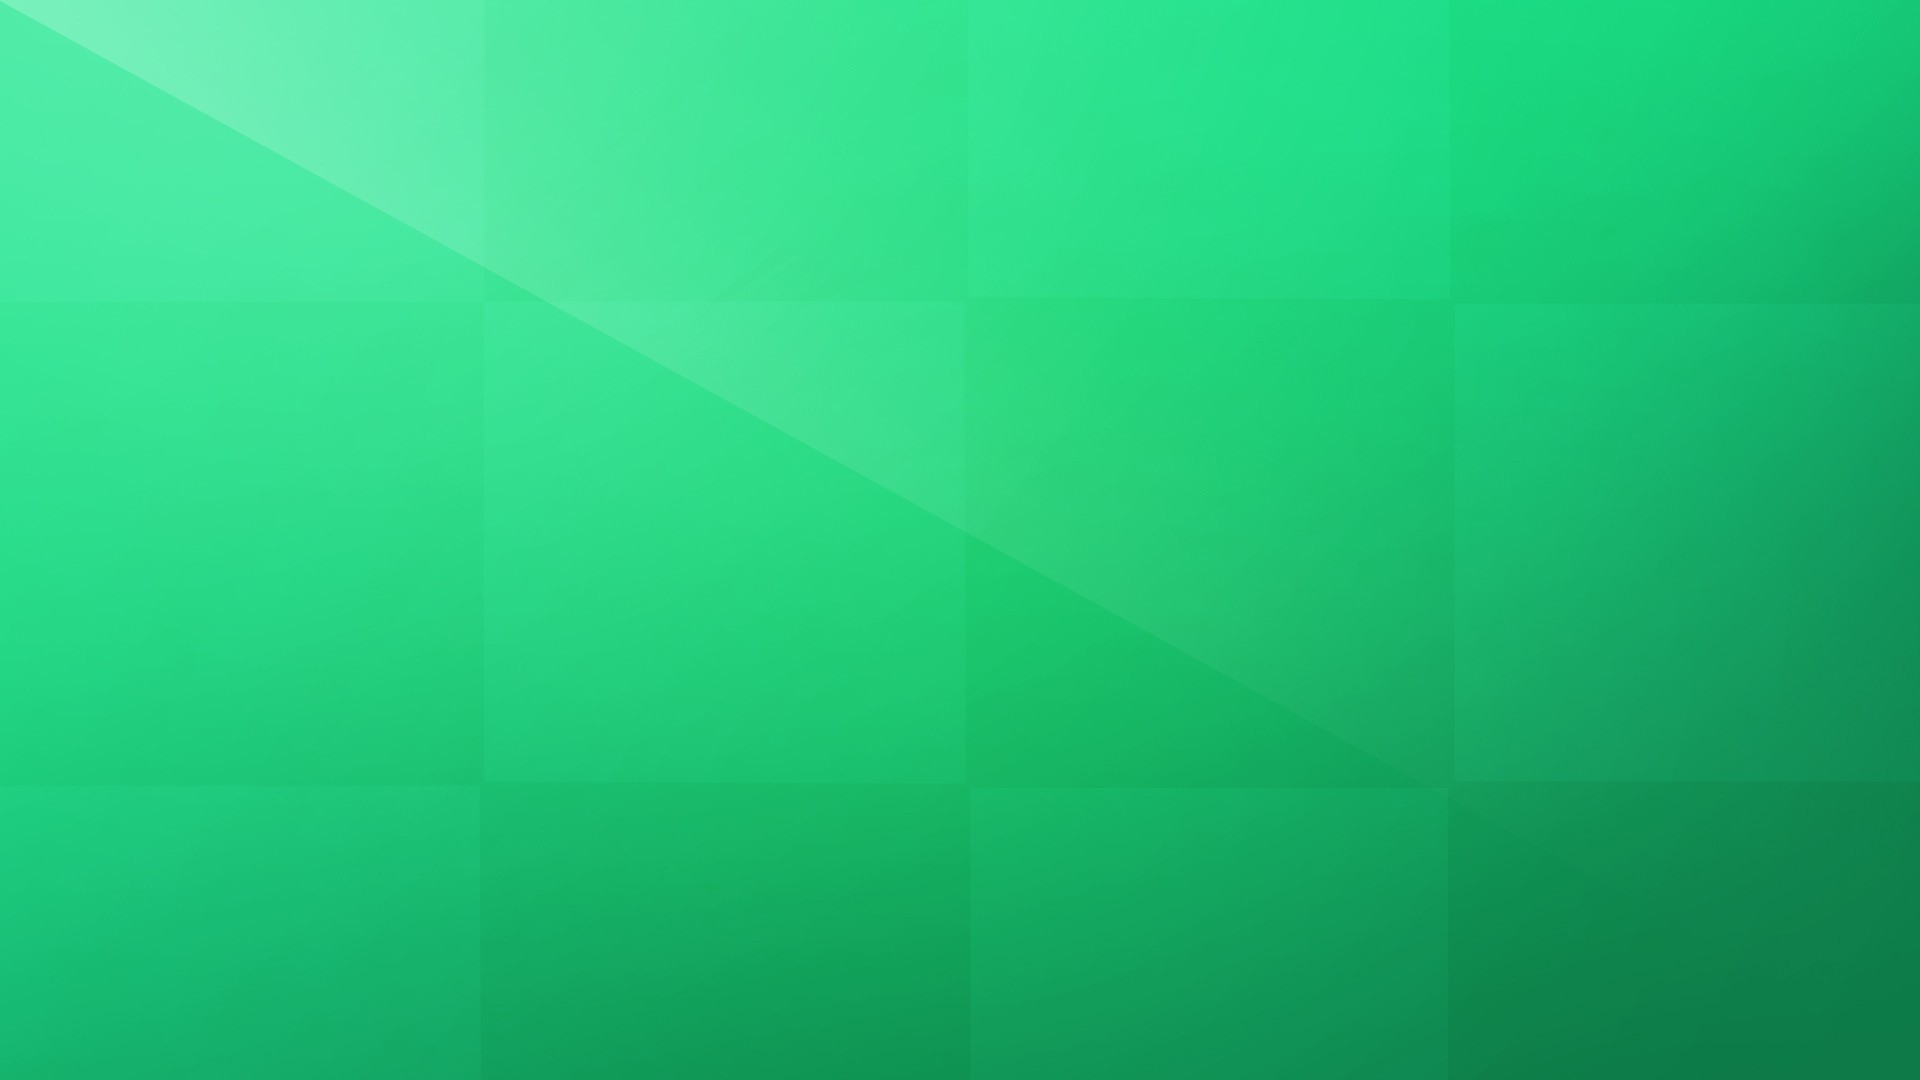 1920x1080 Plain Neon Green Background Solid neon gre